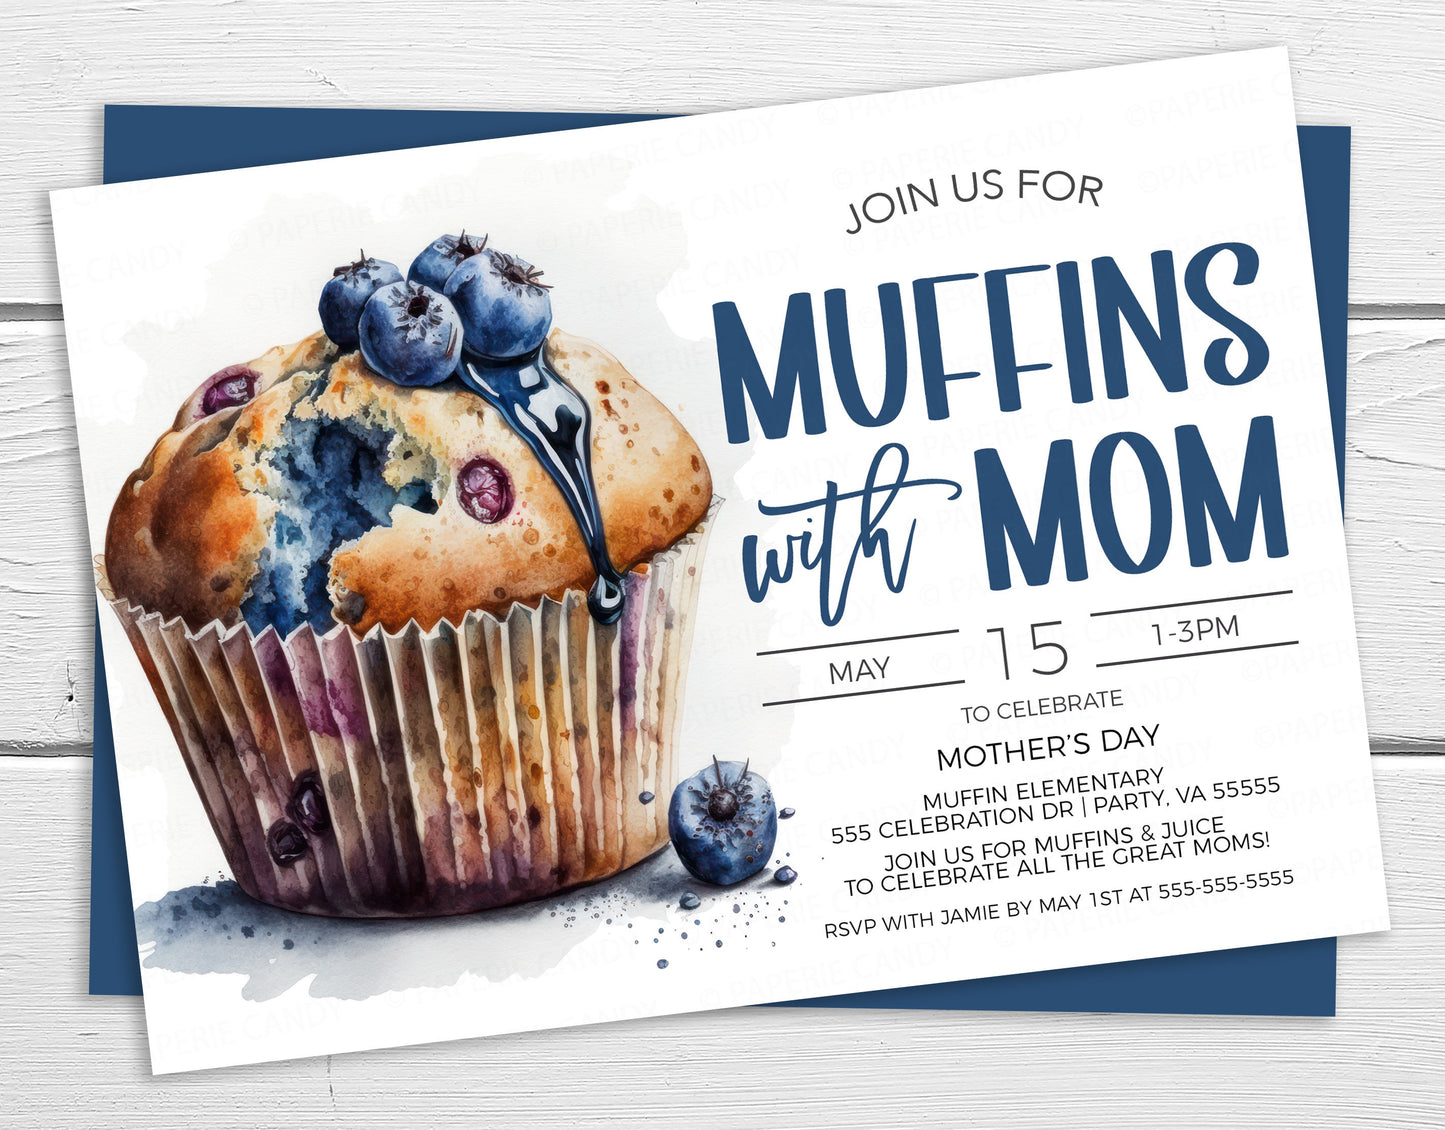 Muffins With Mom Invitation, Mother's Day Muffin Invite, Mother's Appreciation Fundraiser, Thank You Breakfast, Editable Printable Template